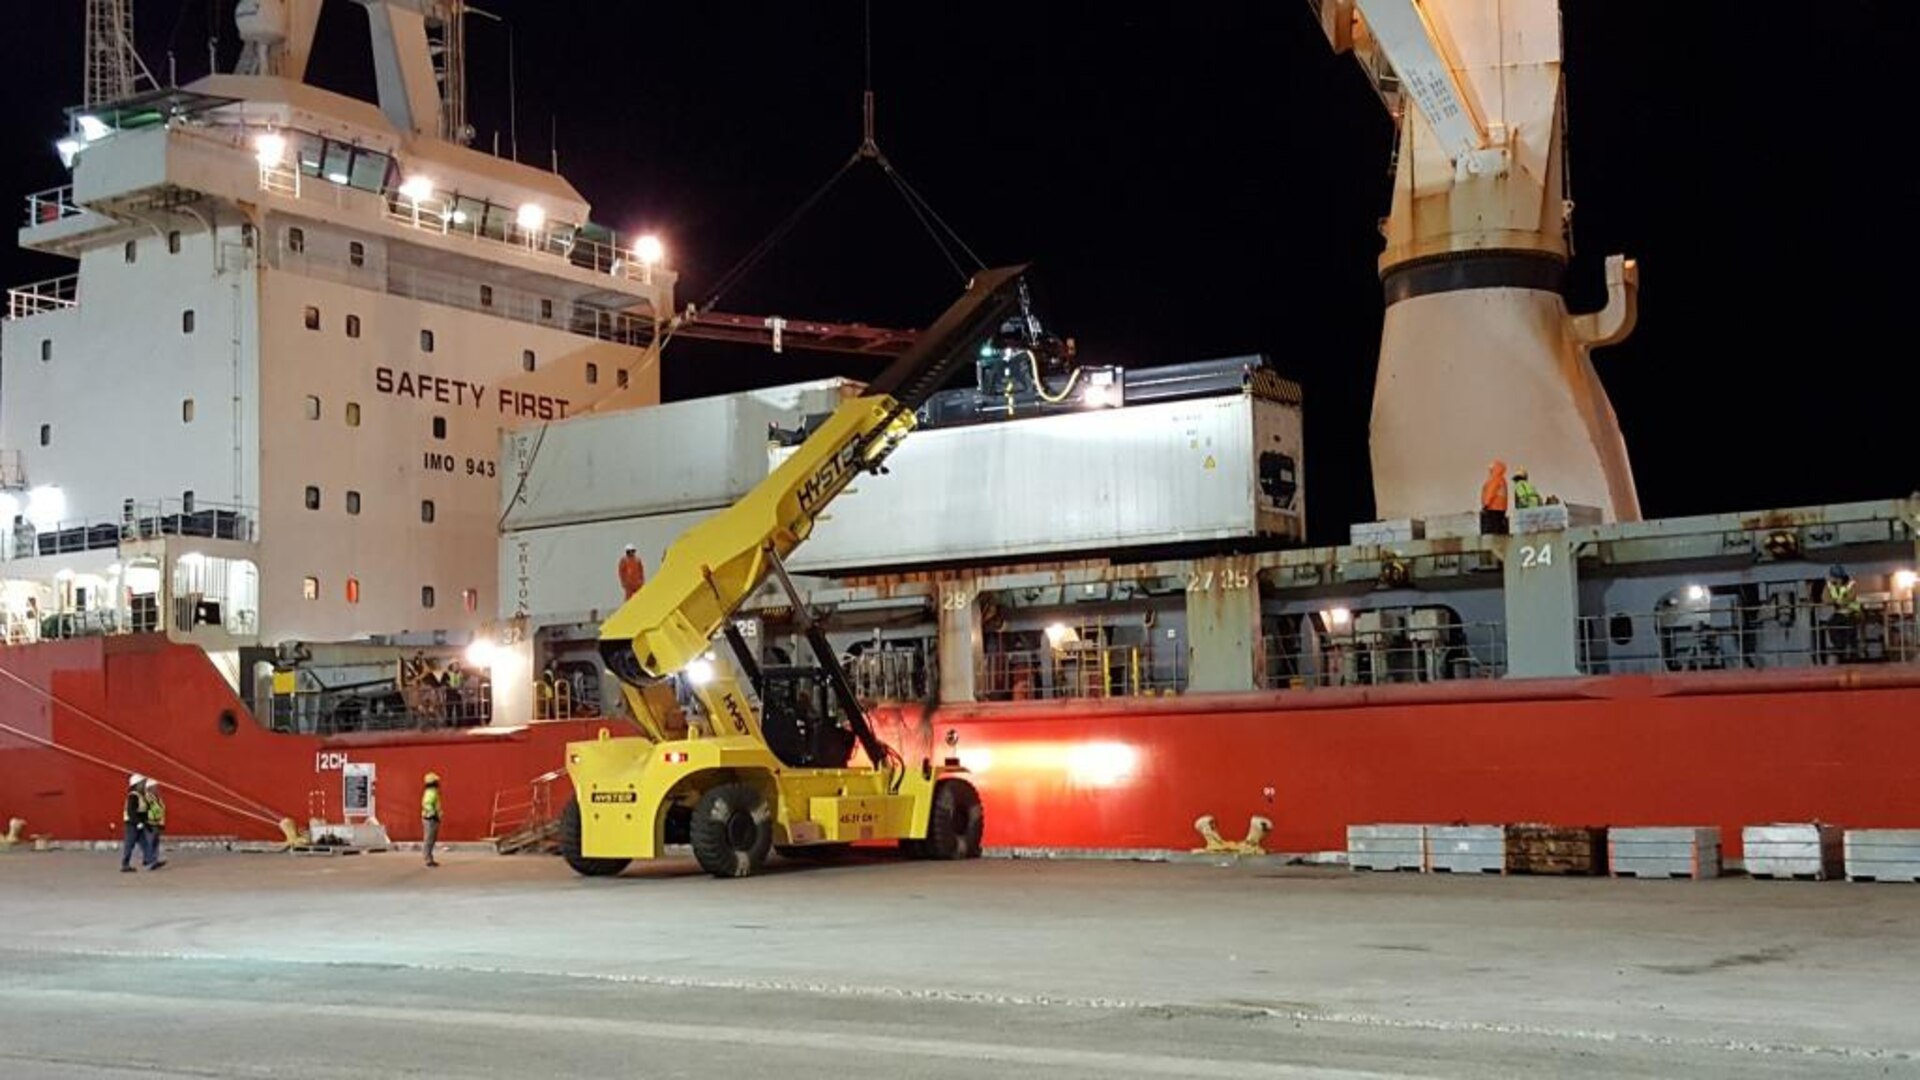 A reach stacker is used to load cargo containers onto the deck of the MV Ocean Giant.